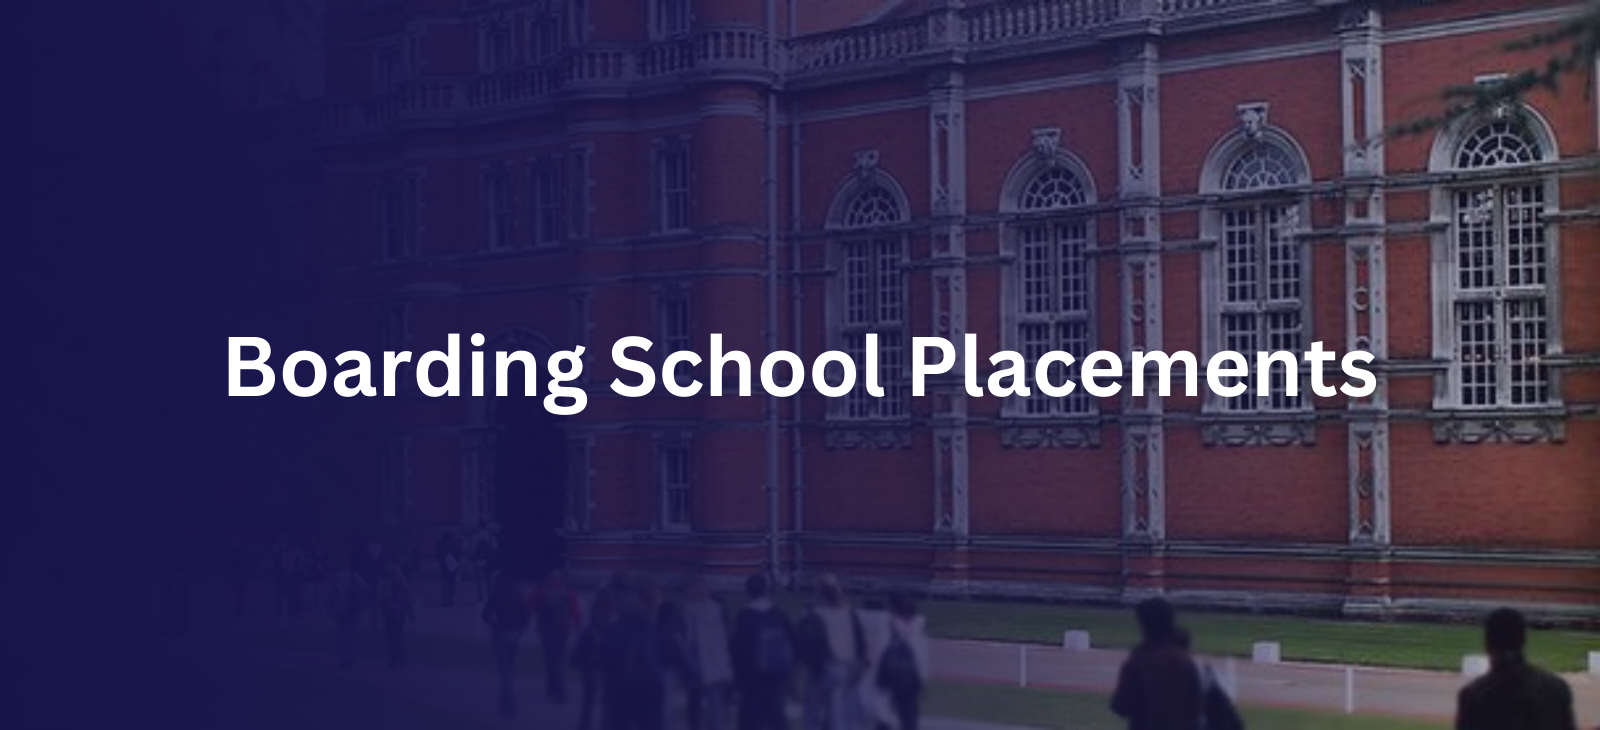 One Hub Study's Boarding School Placement Services